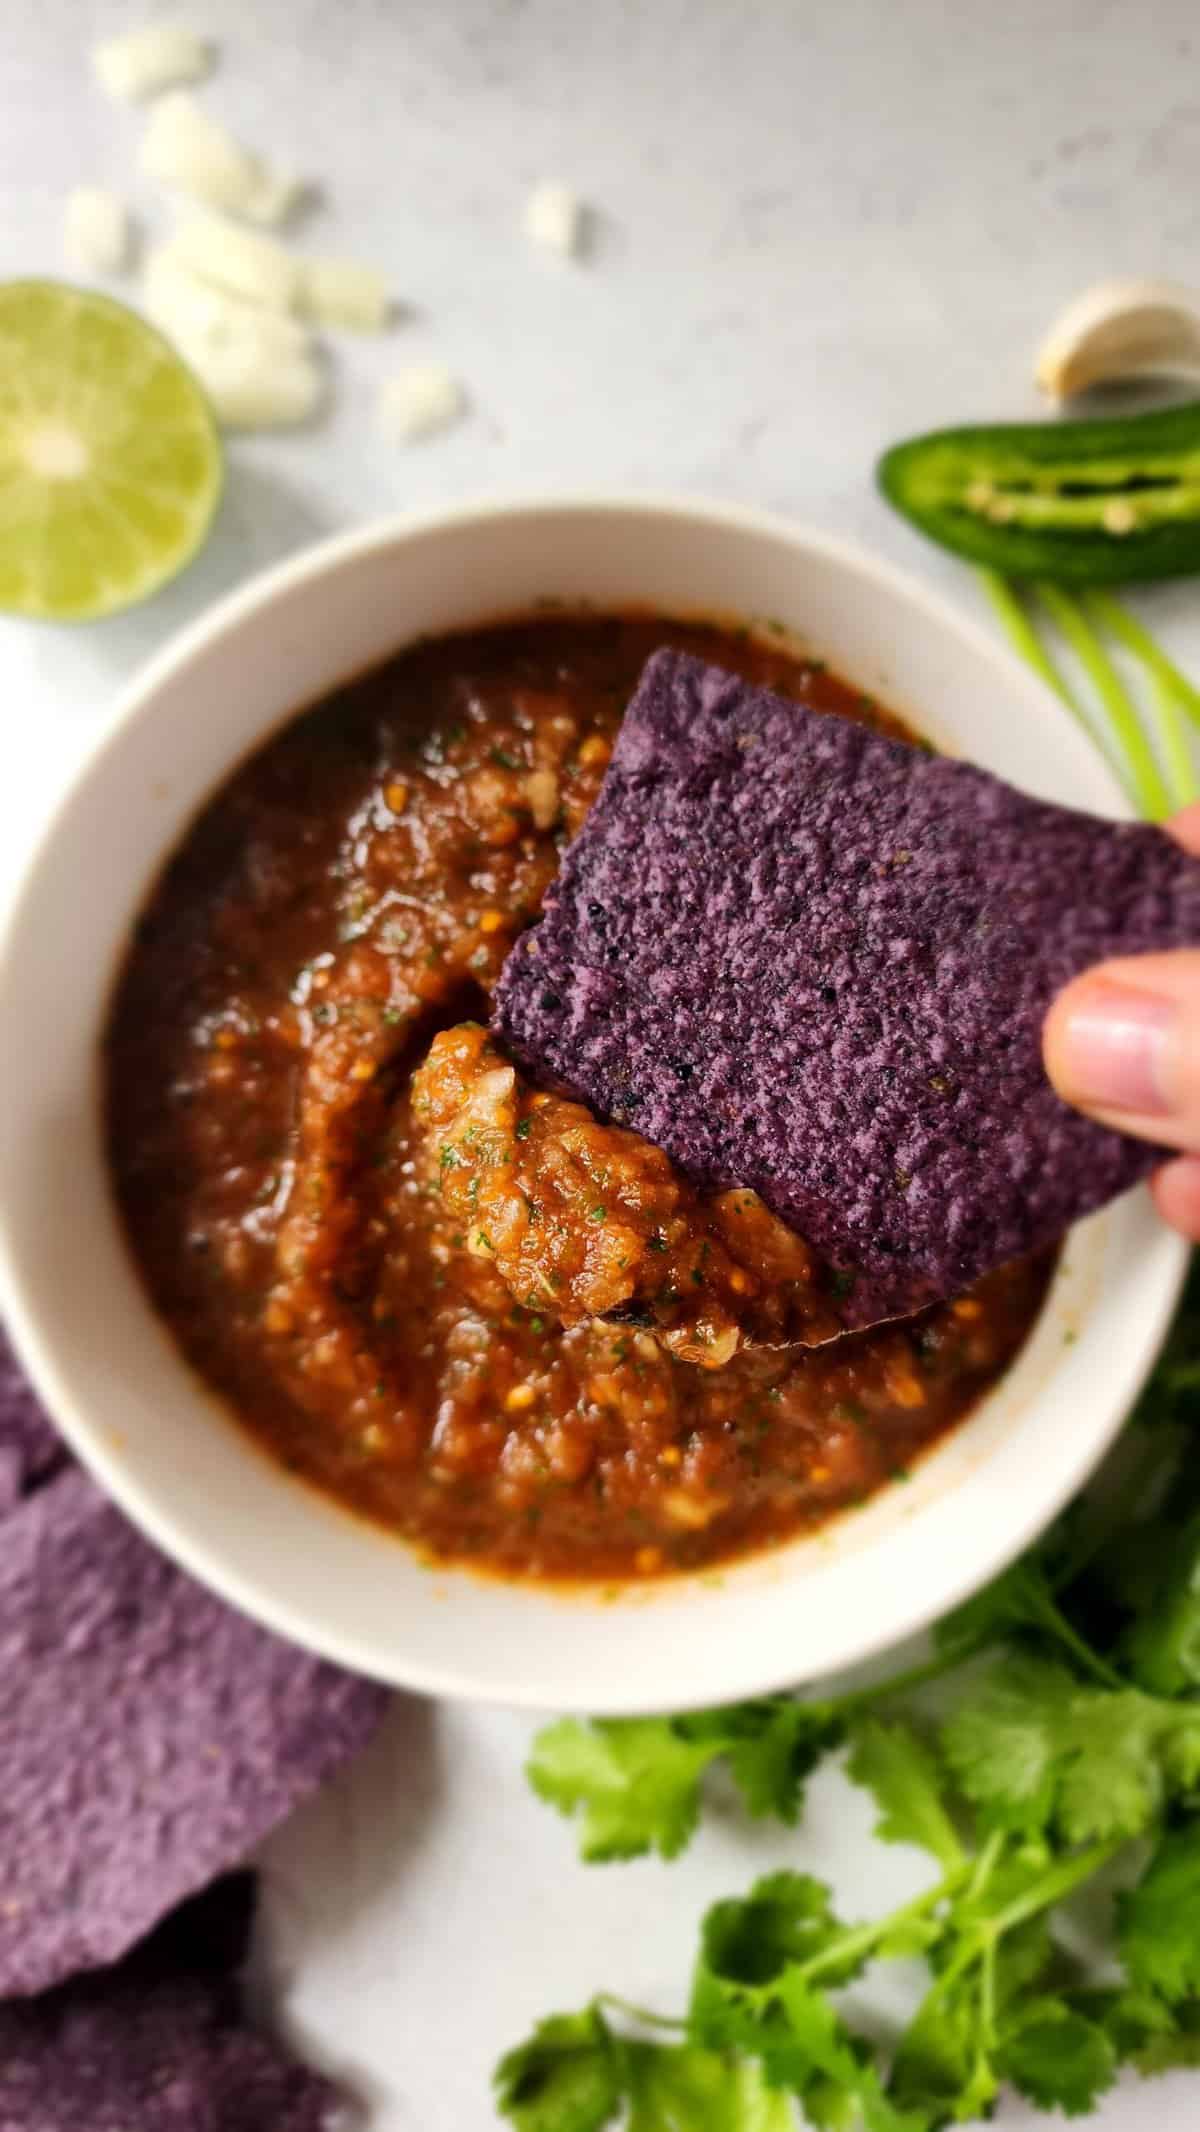 Easy Homemade Salsa in a bowl, with a hand dipping in a chip